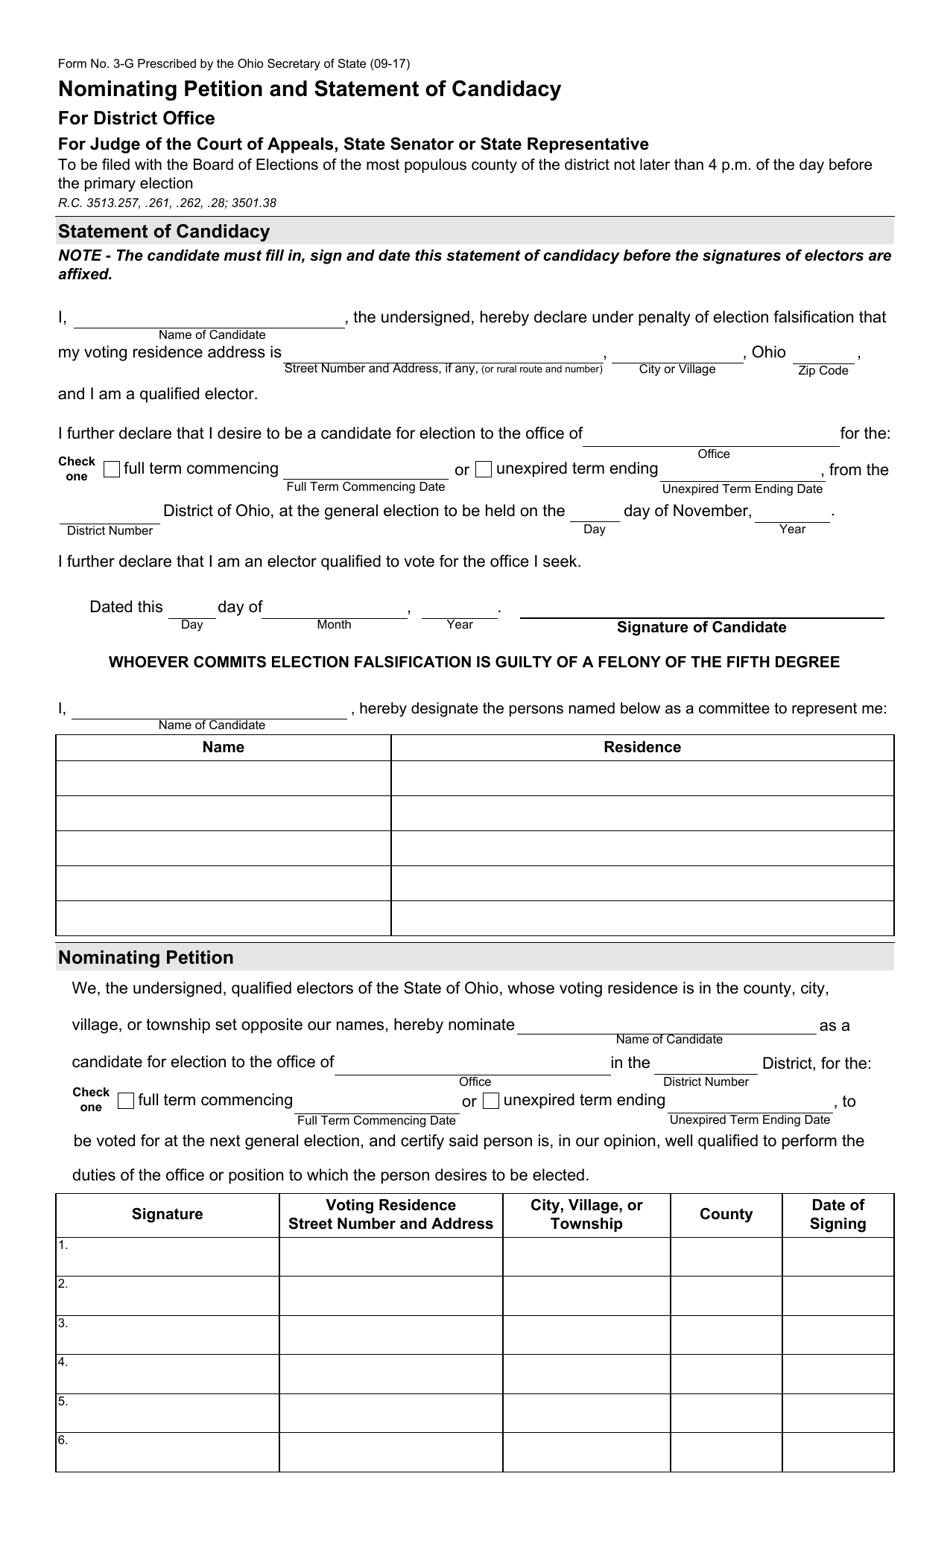 Form 3-G Nominating Petition and Statement of Candidacy for Judge of the Court of Appeals, State Senator or State Representative - District Office - Ohio, Page 1